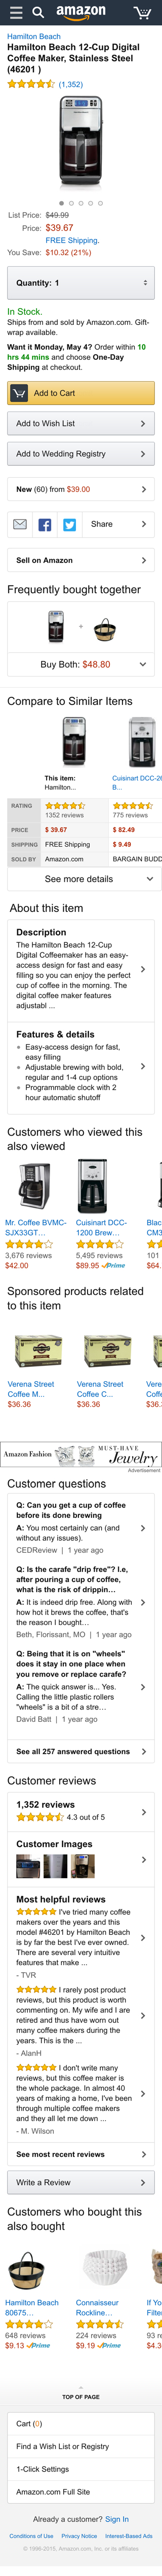 Amazon mobile product page design example